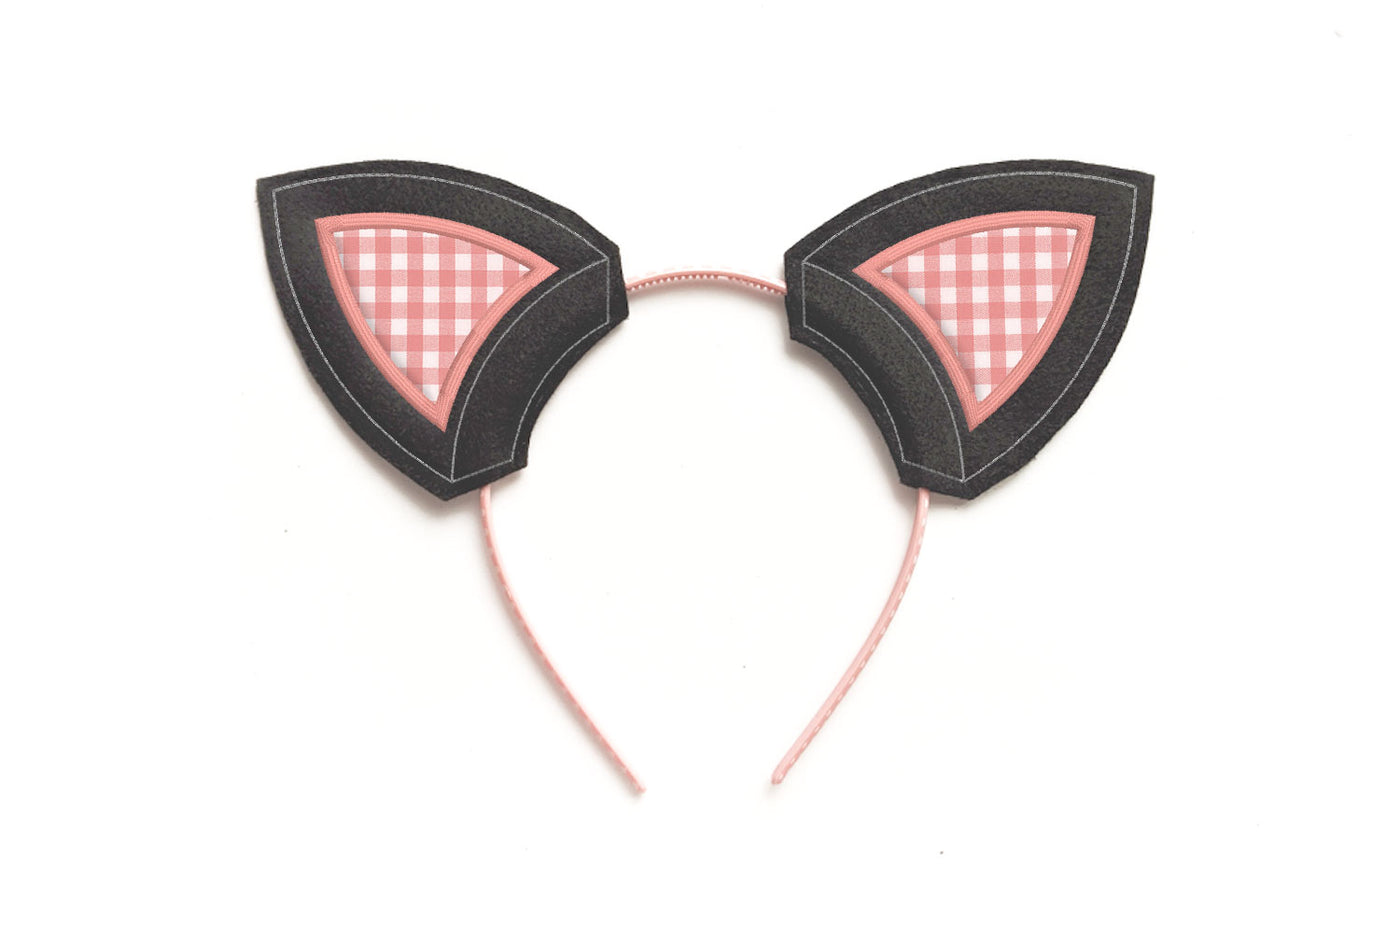 Applique costume cat ears ITH embroidery